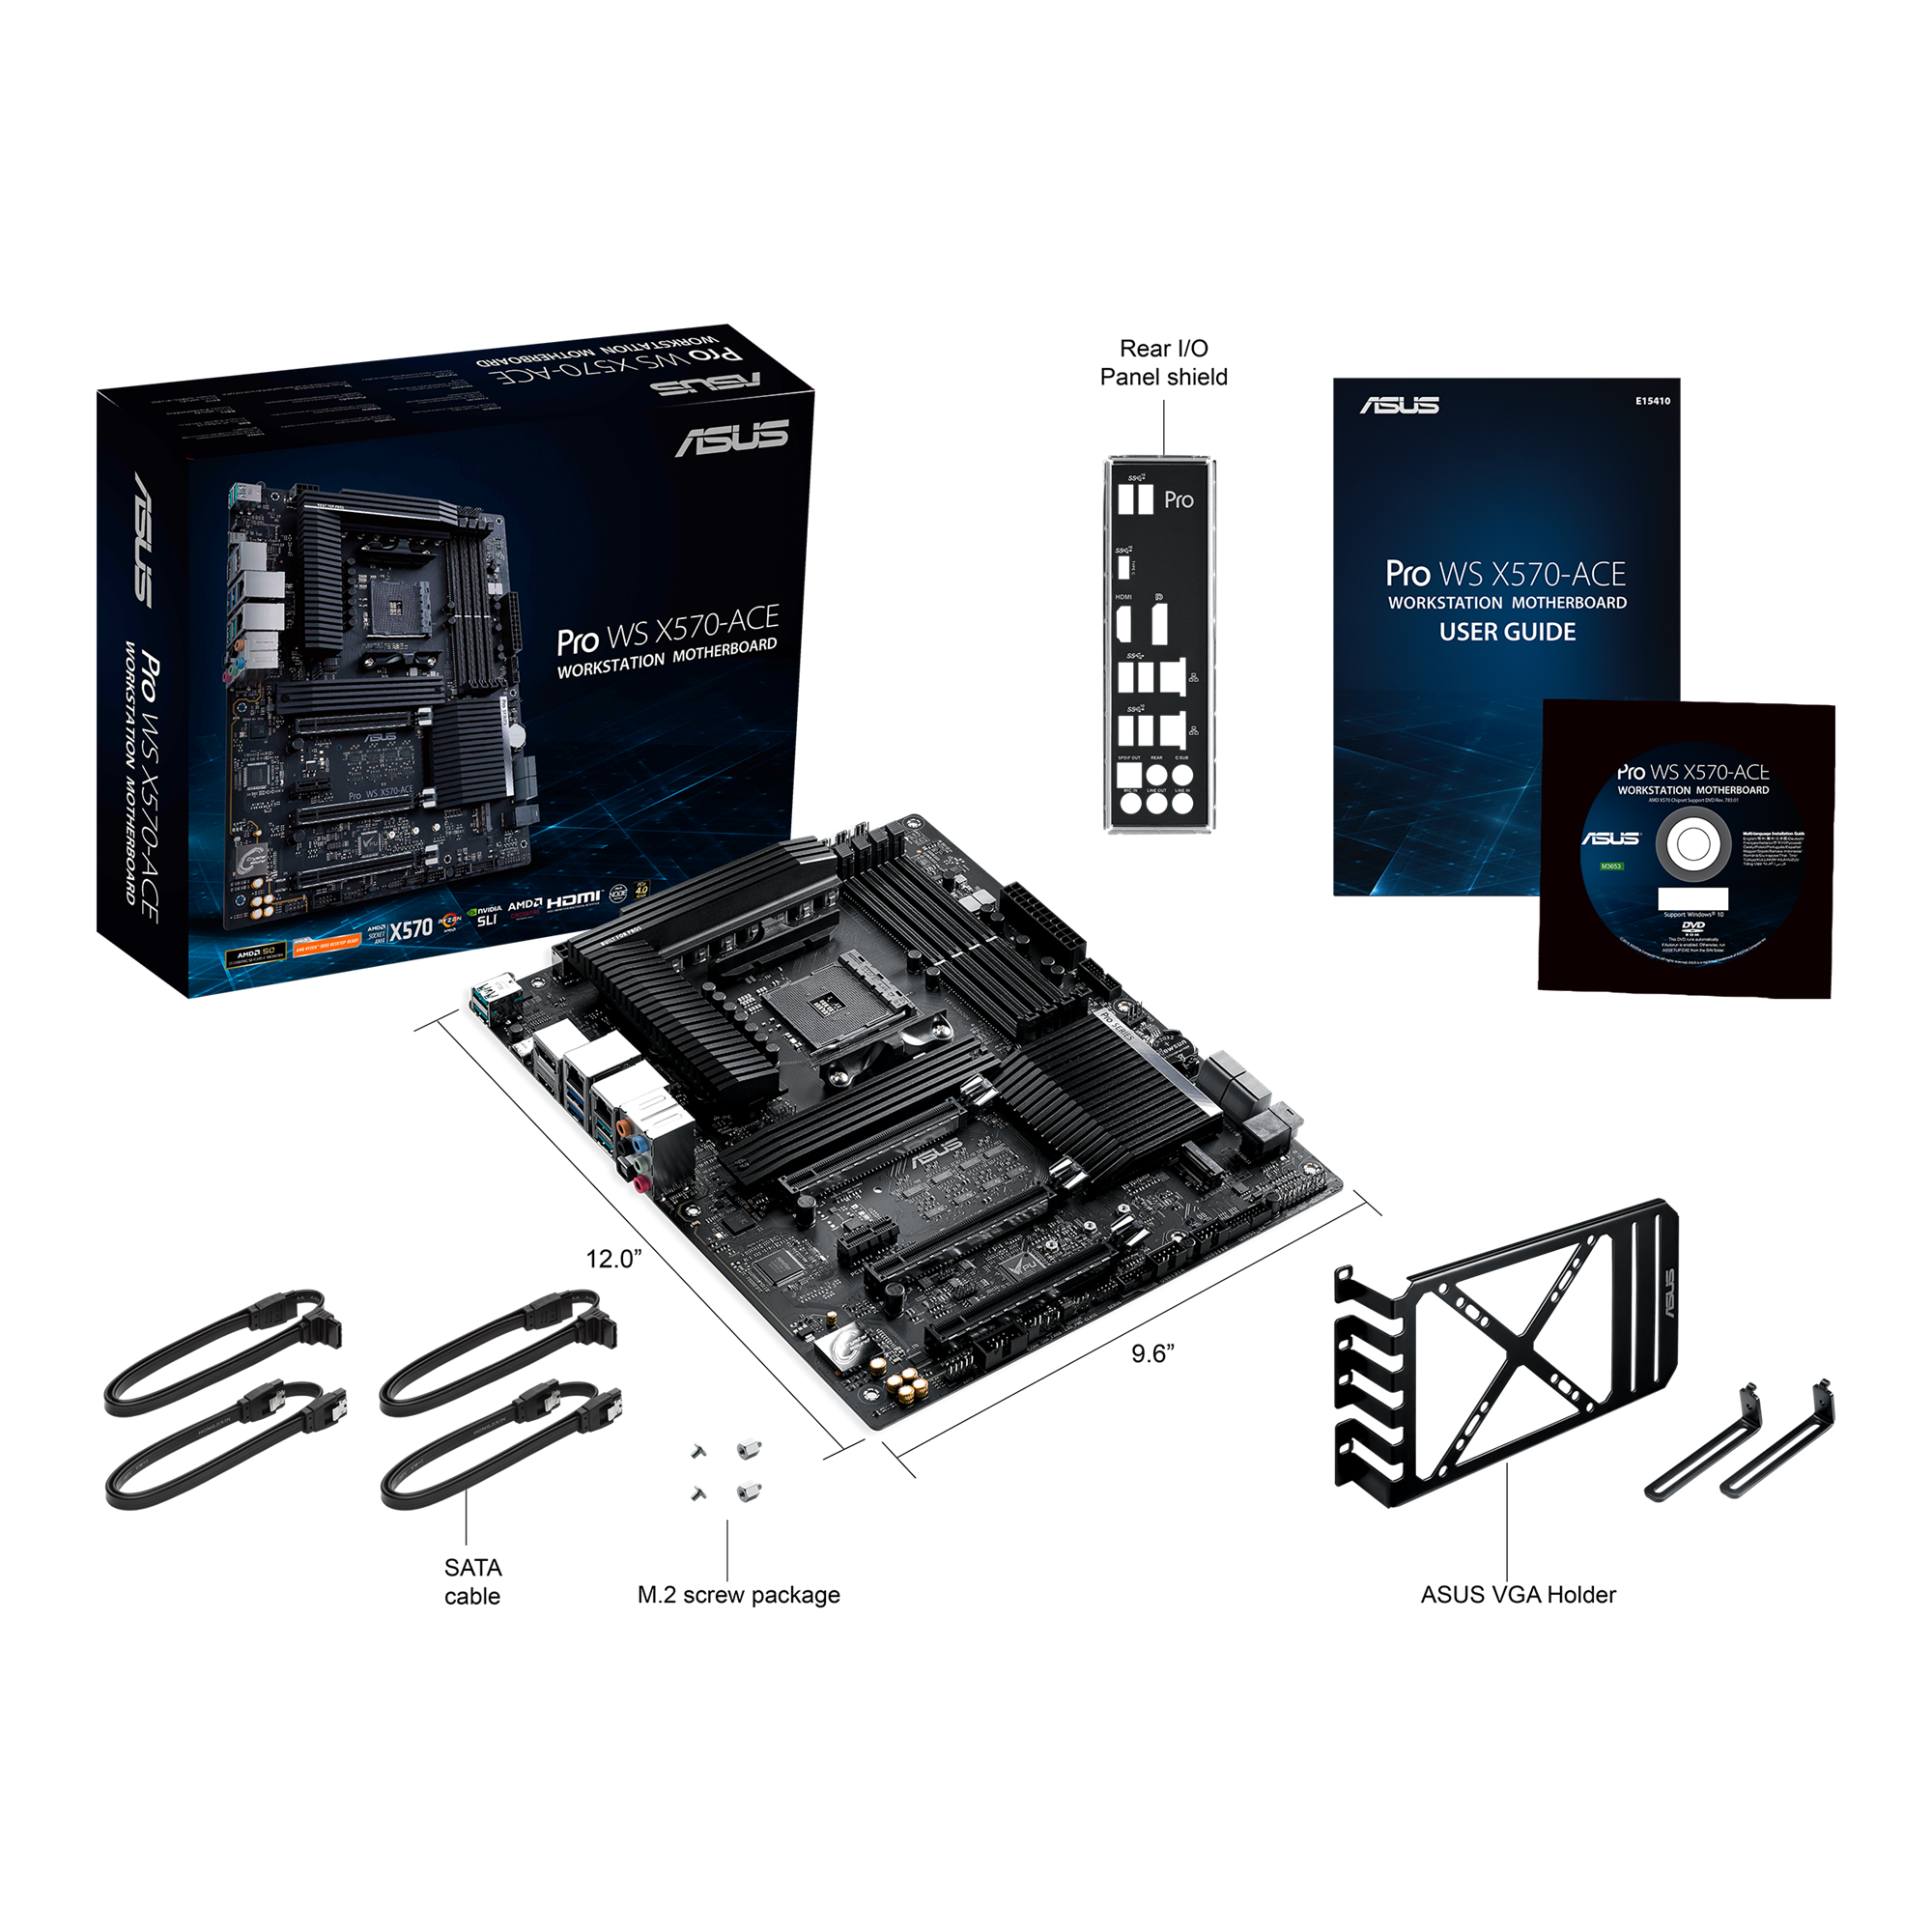 Pro WS X570-ACE｜Motherboards｜ASUS USA